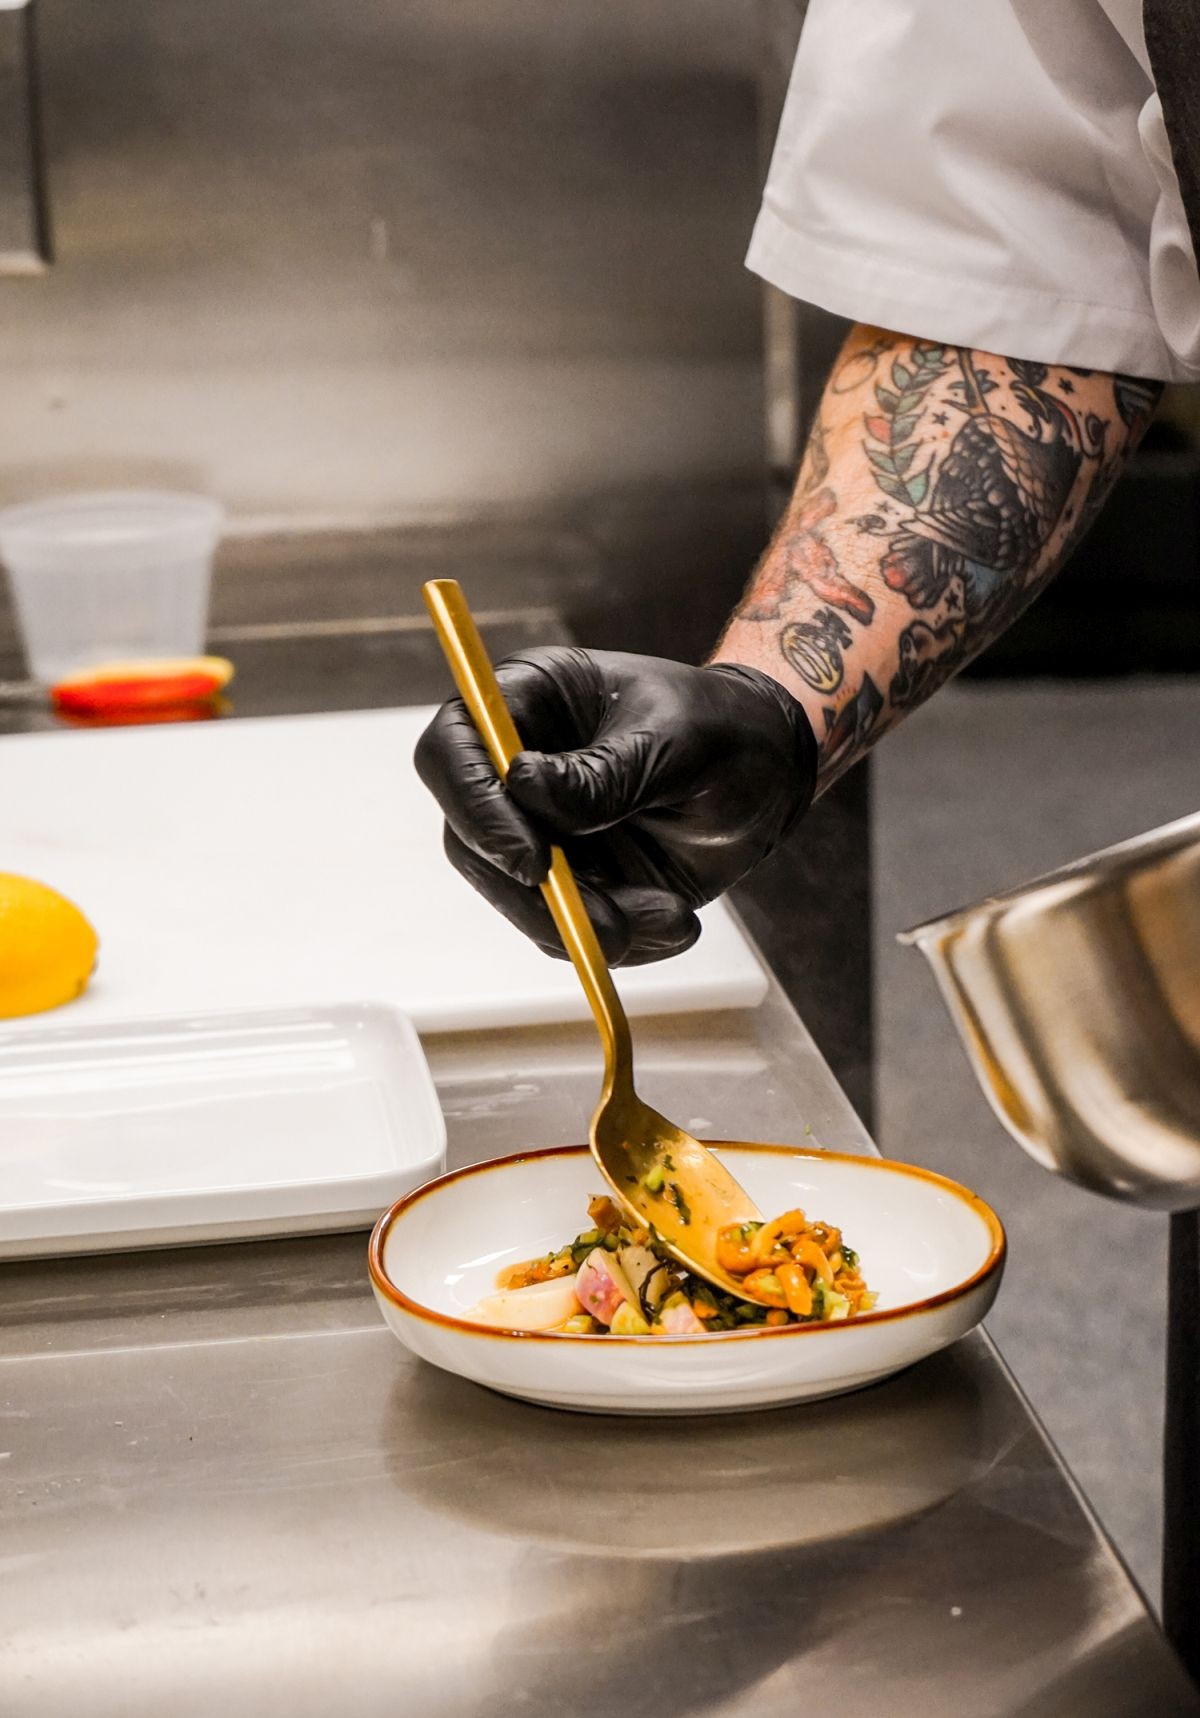 A dish is prepared ahead of the upcoming Taste of Ardsley Station culinary event to be held March 25 at the Trustees' Garden Tasting Kitchen in Savannah.